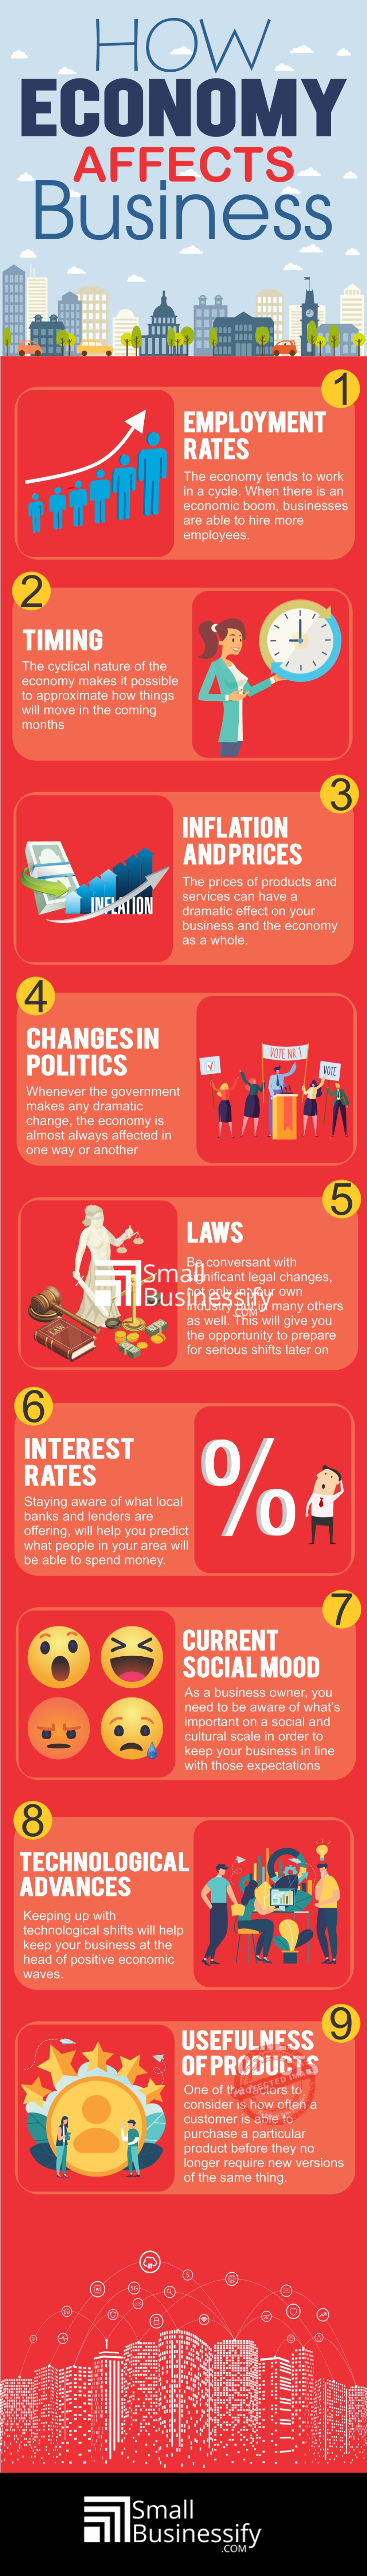 How Economy Affects Business Infographic